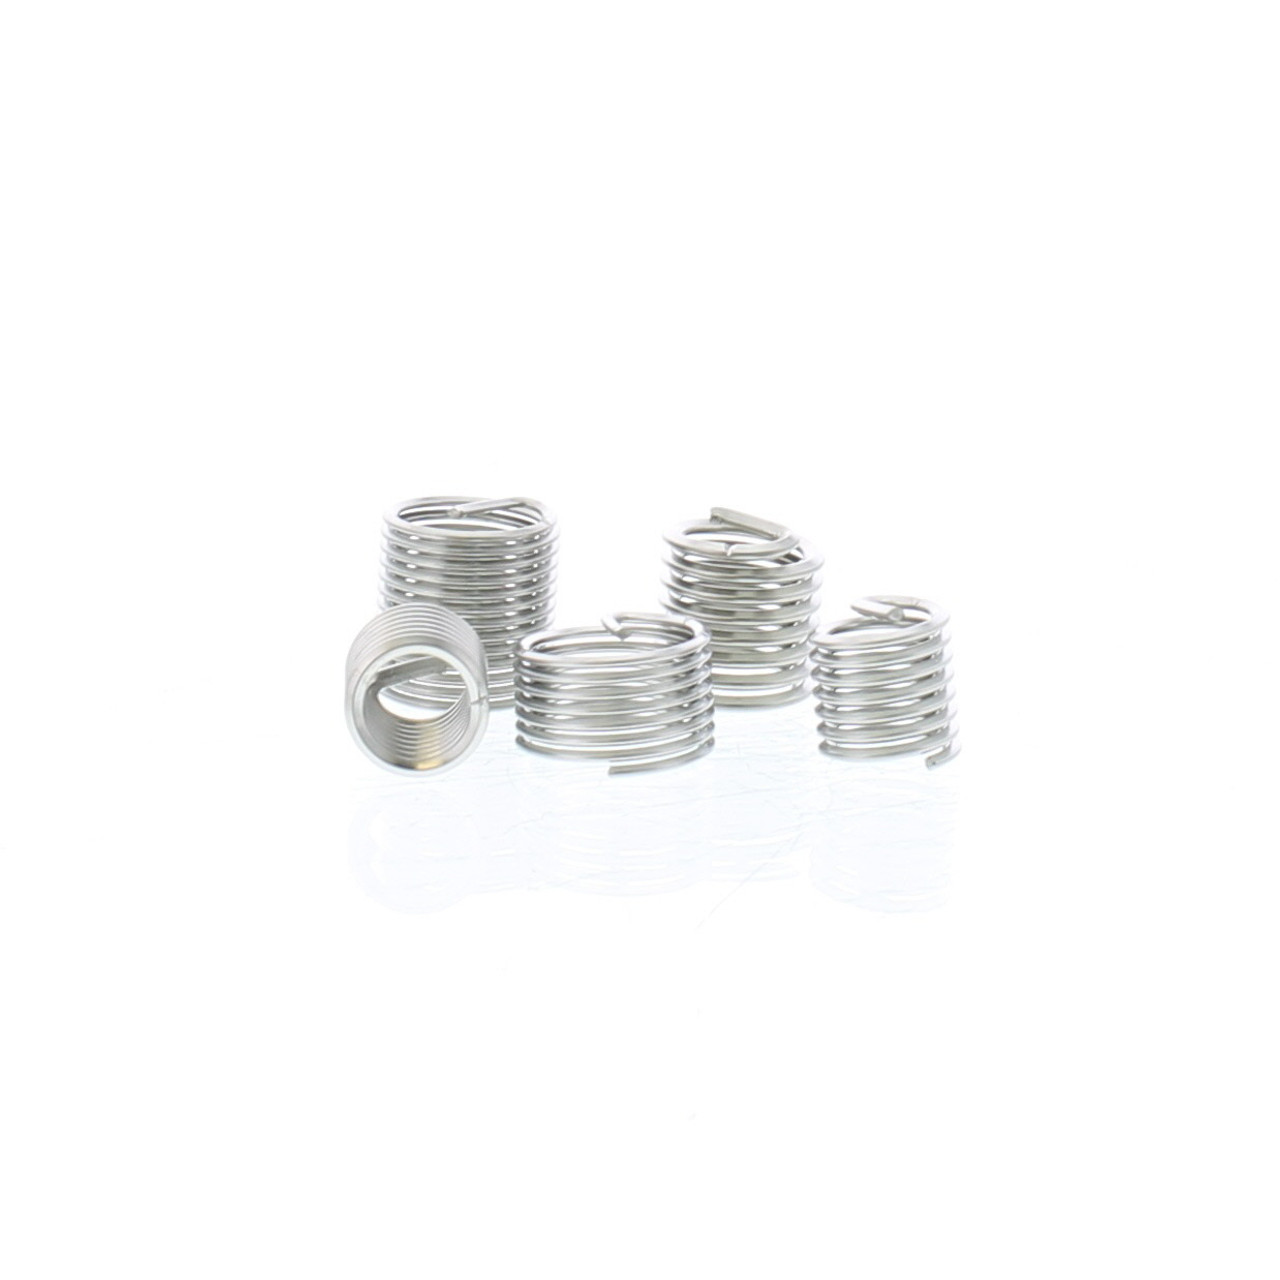 Stainless Steel M6 Inserts